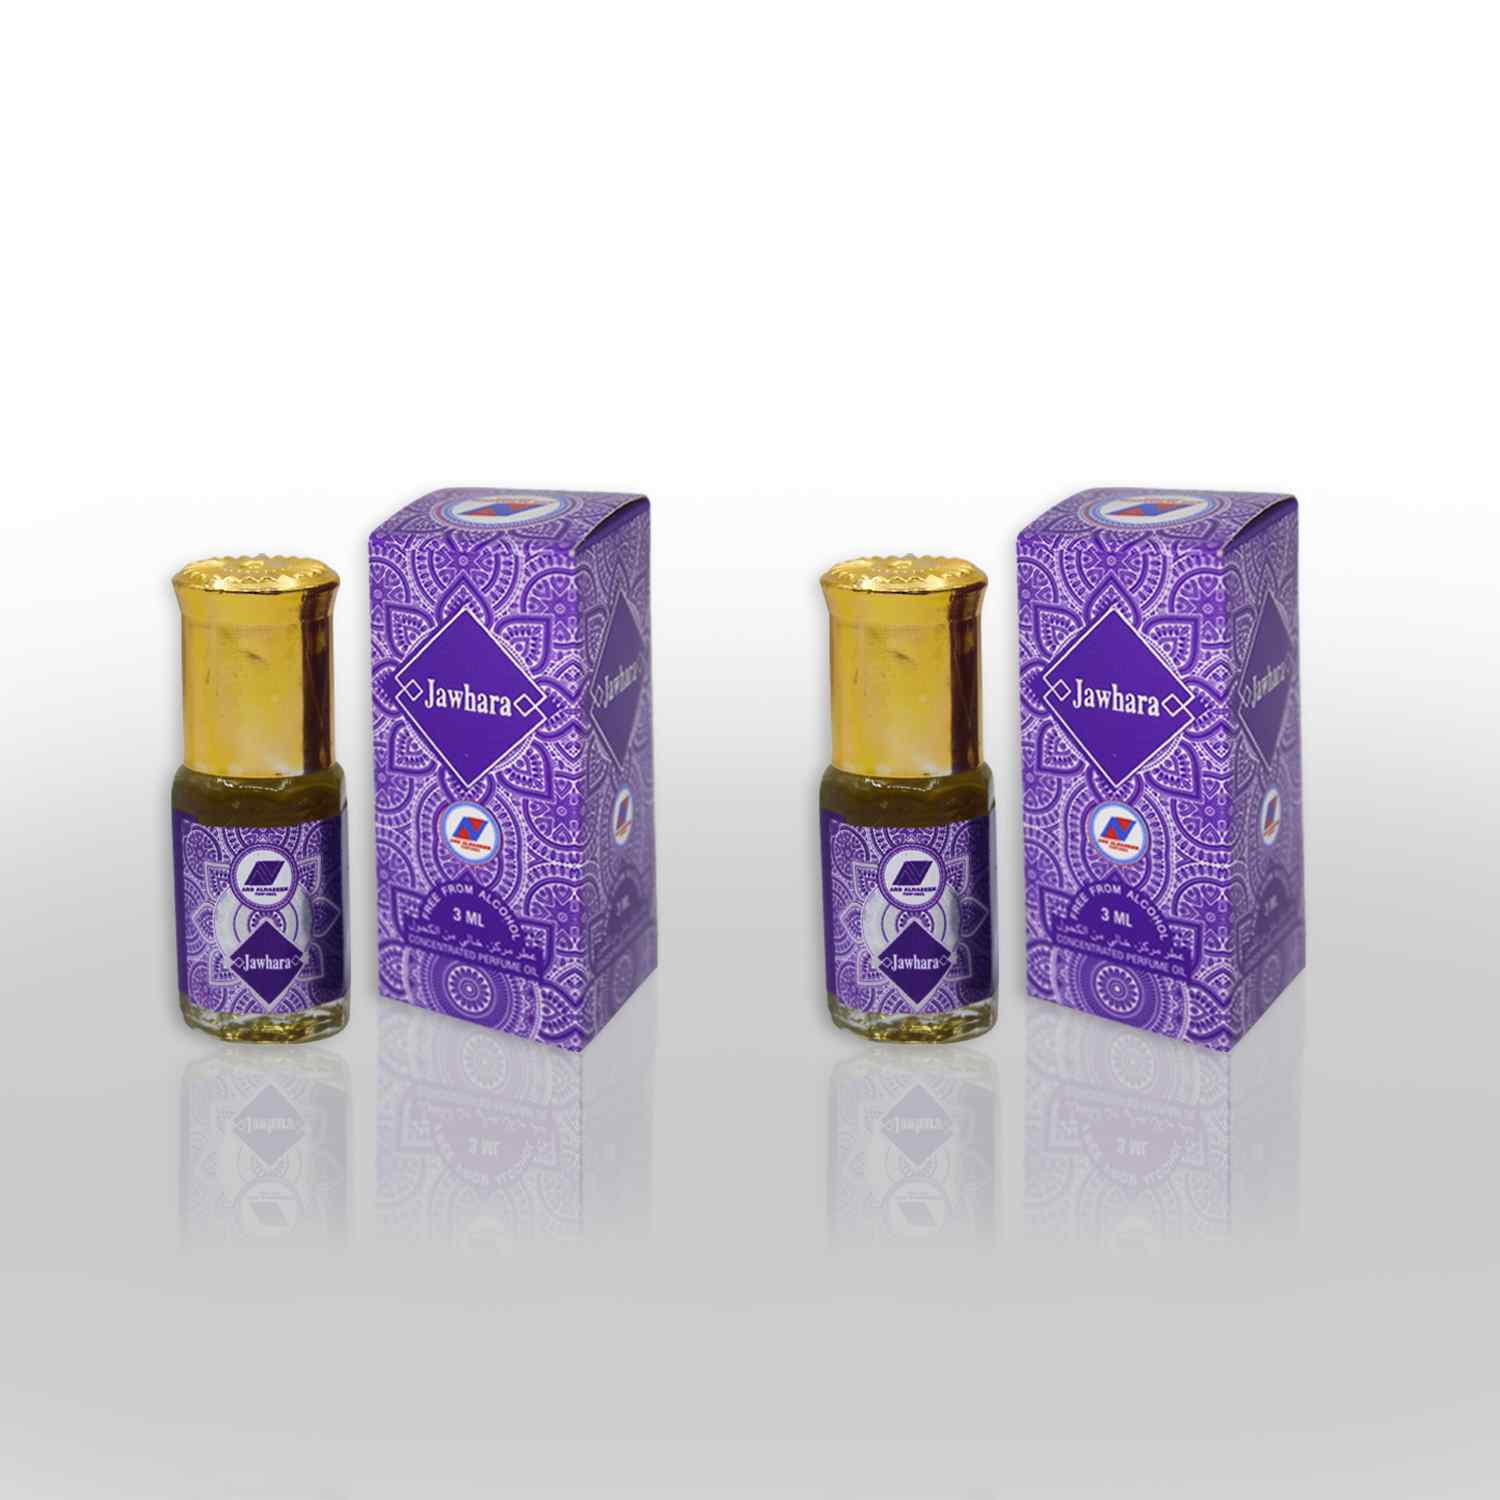 Jawhara concentrated oil attar 3ml by ard perfumes